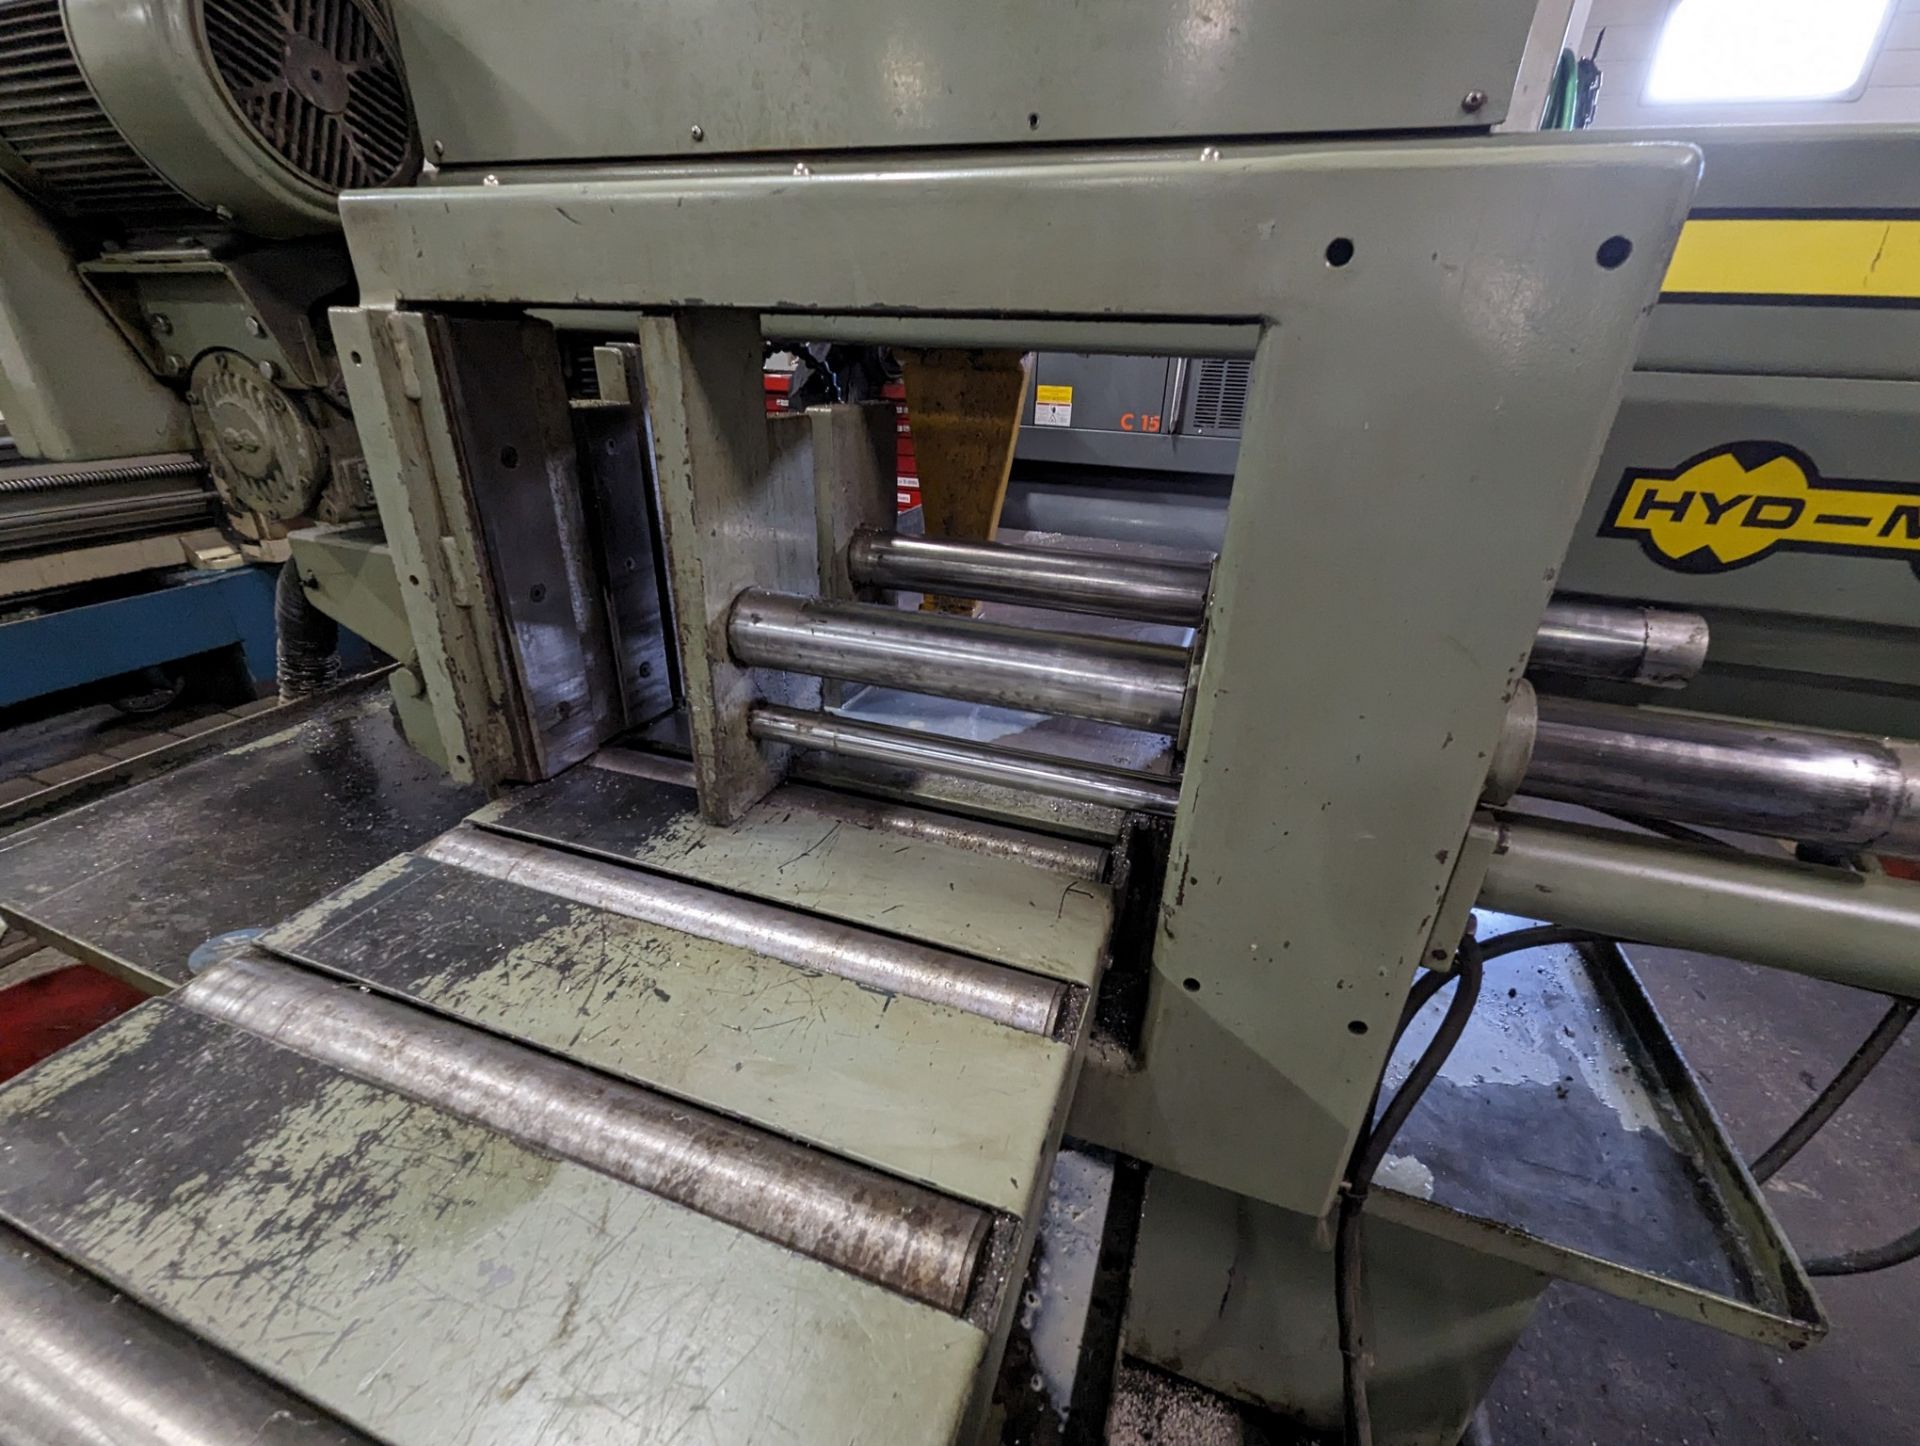 HYD-MECH S-20A SERIES II AUTOMATIC HORIZONTAL BANDSAW, S/N 80298380 W/ CONVEYOR (RIGGING FEE $825) - Image 9 of 13